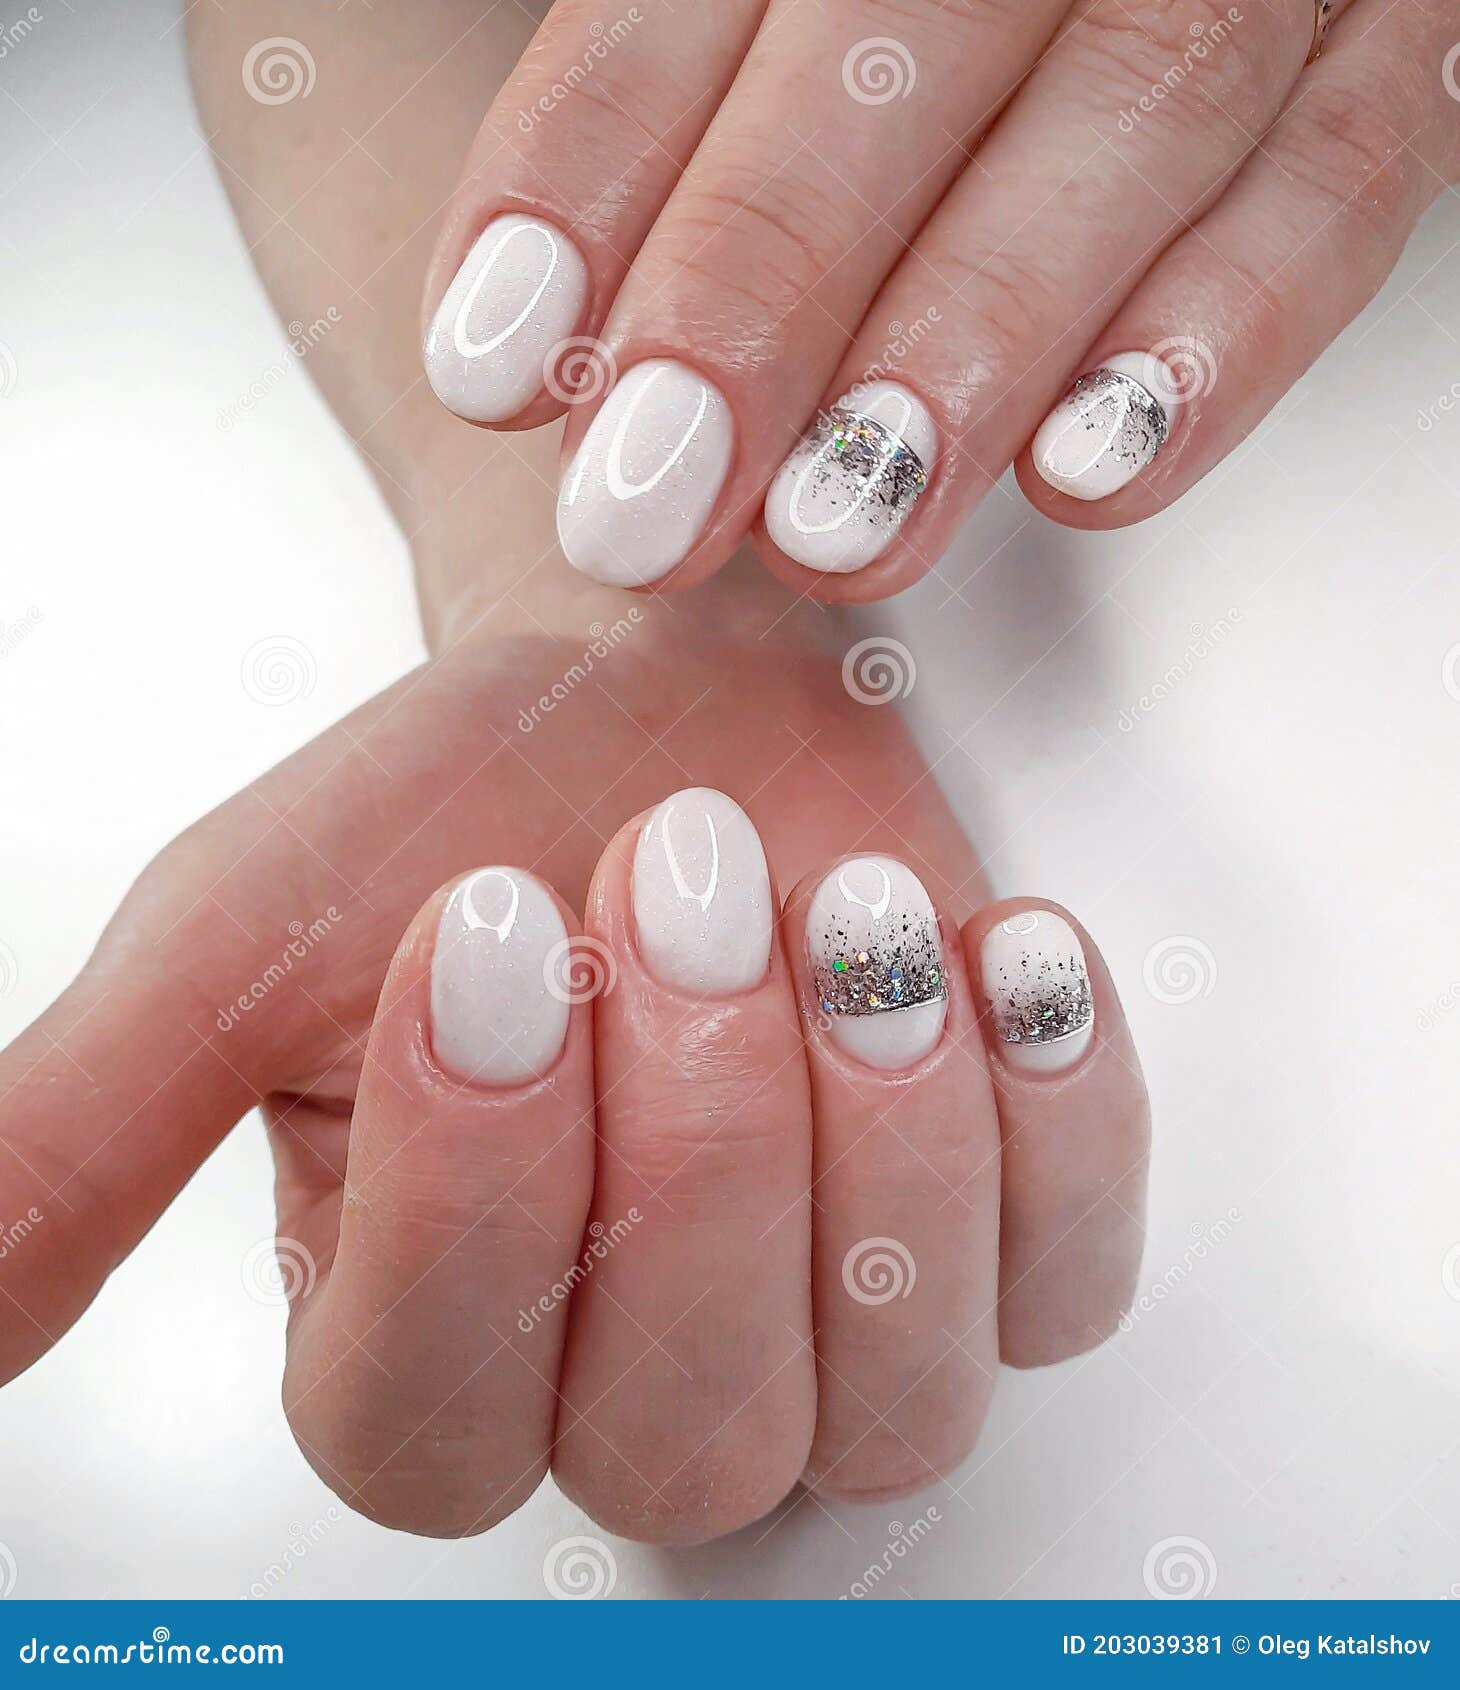 40+ Examples Of Grey & Silver Nails For A Cool Manicure |